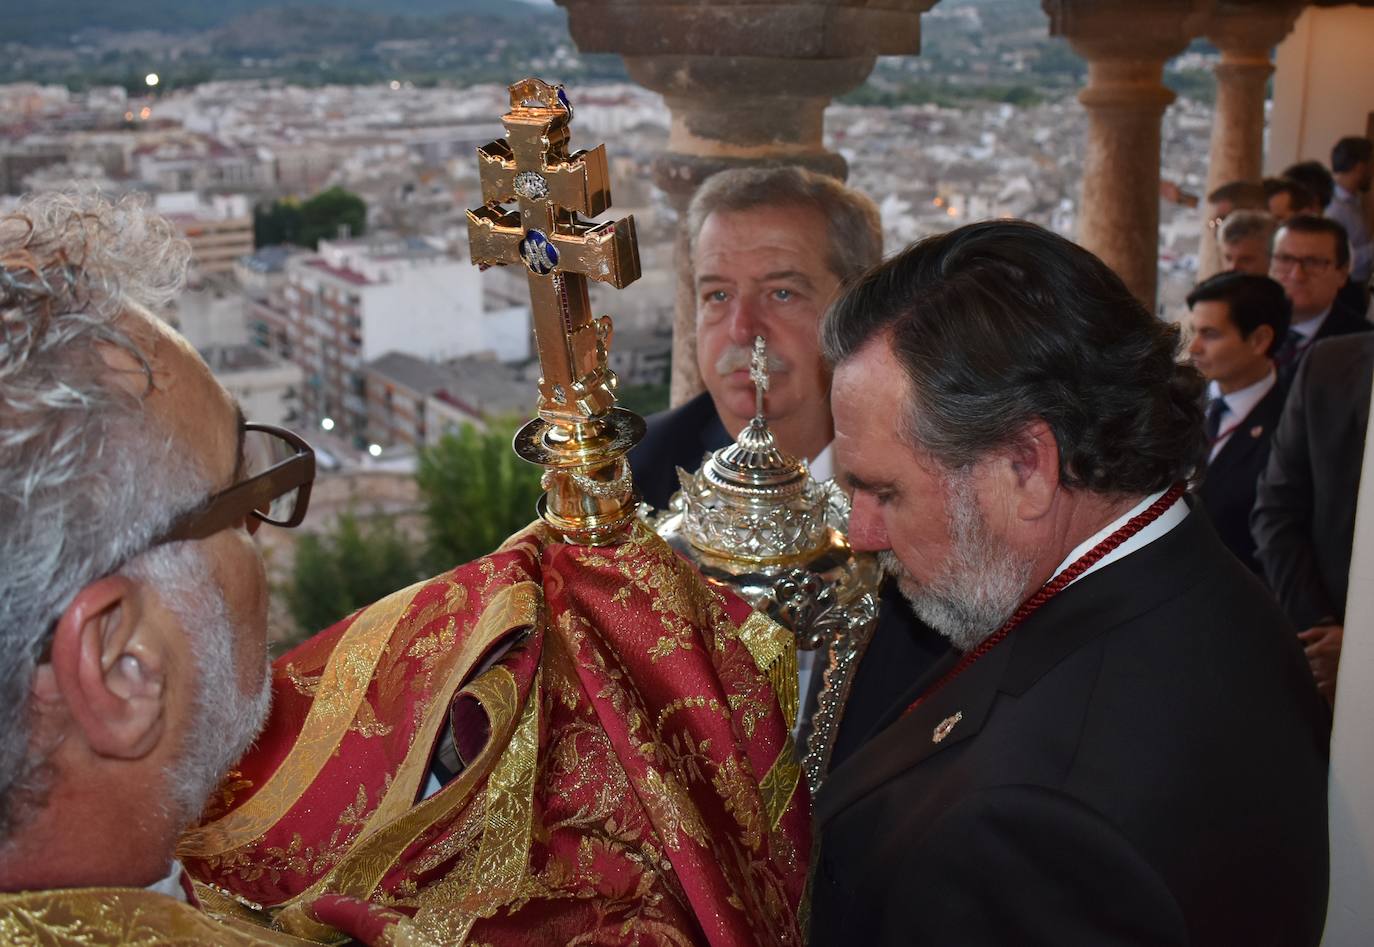 The rector gives the blessing with the True Cross from the highest part of the basilica. 